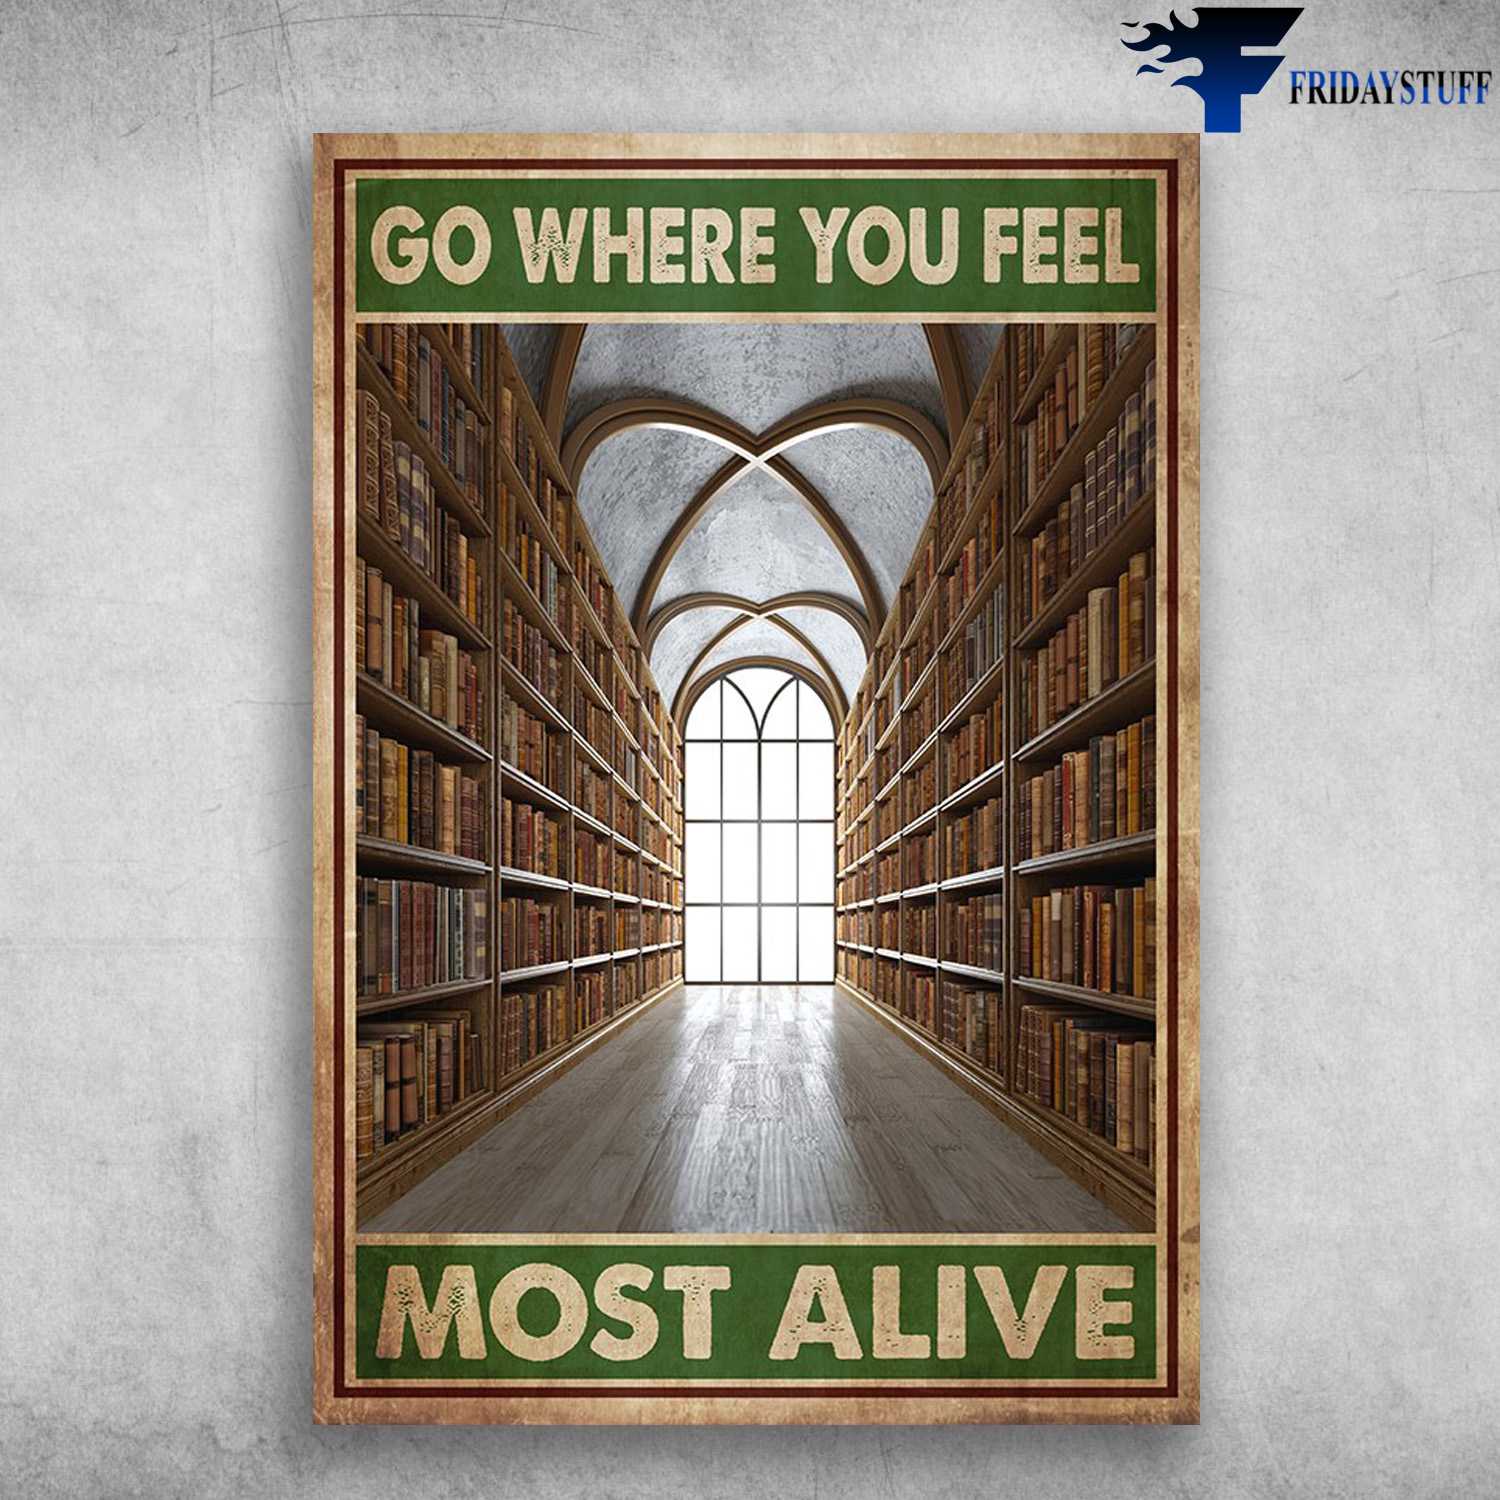 Bookshelf Library - Go Where You Feel, Most Alive, Book Lover